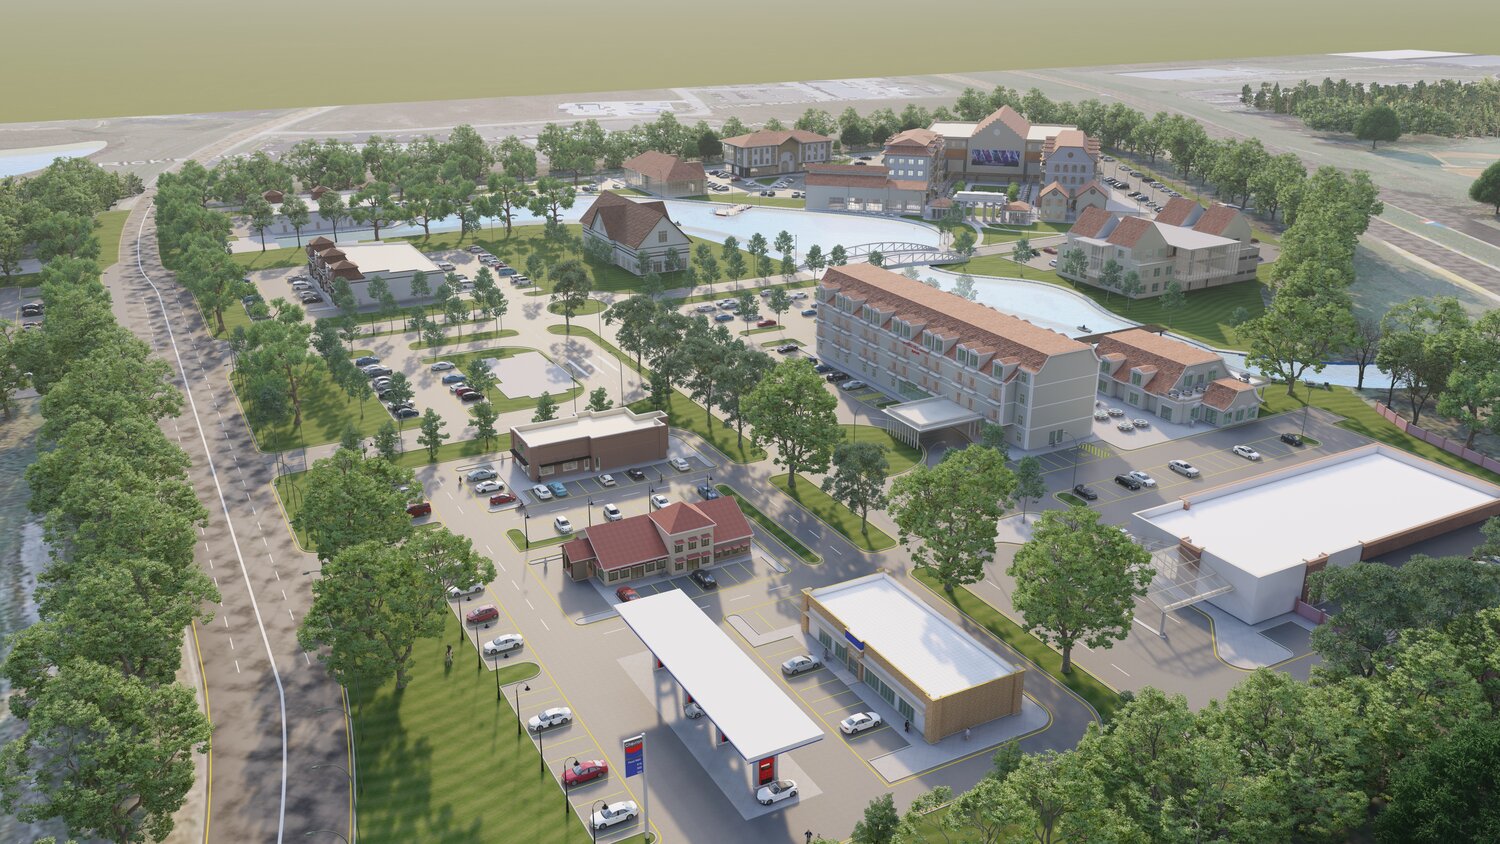 An architectural rendering shows what Germantown Village will look like once completed.